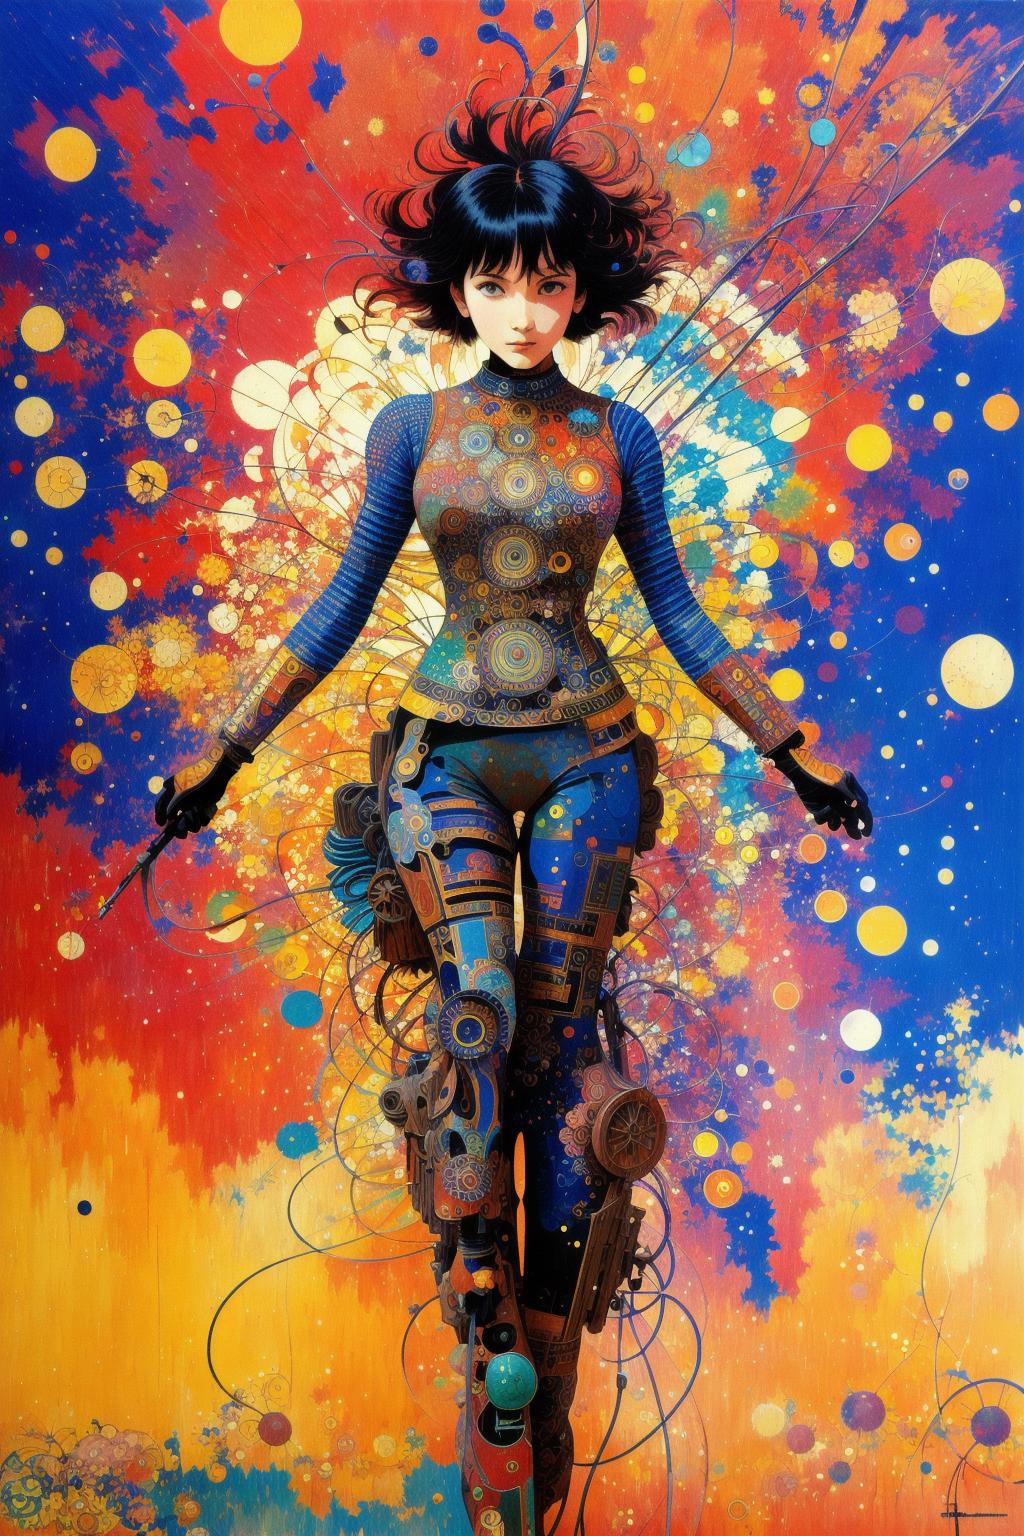 A woman in blue with chains and gears painted on her body stands in front of a colorful background.